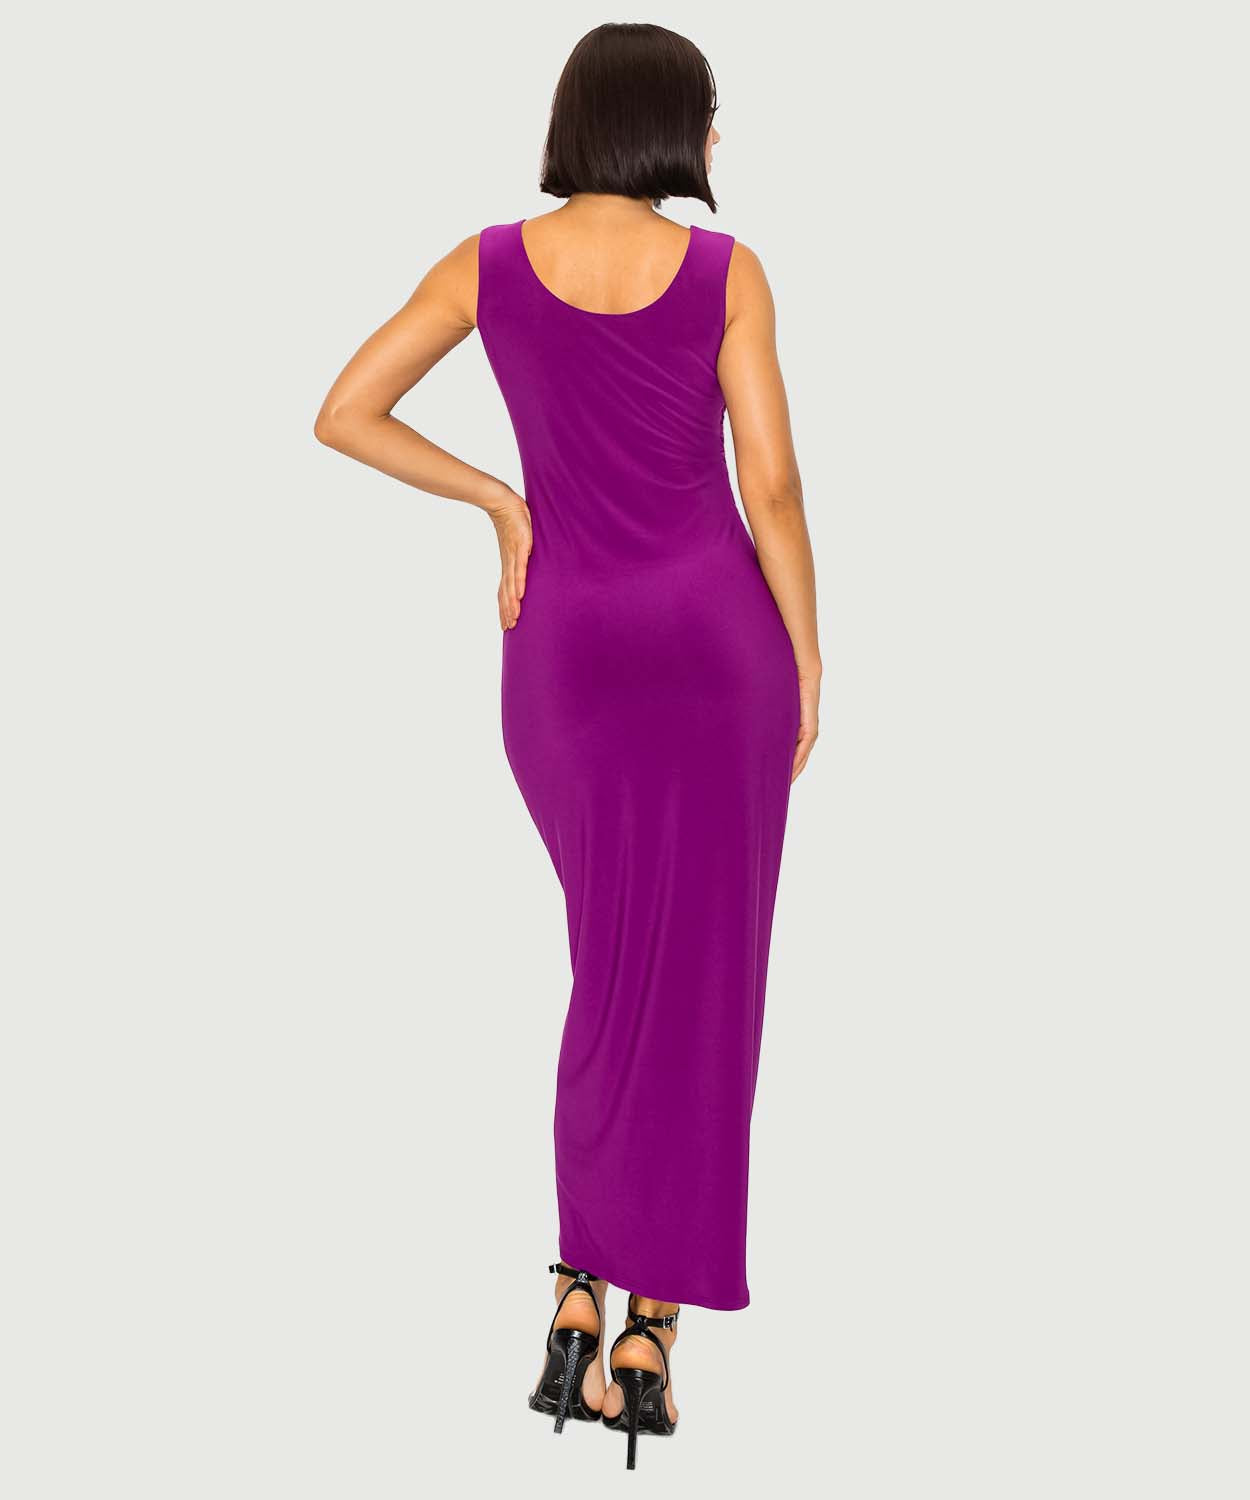 Double Scoop Tank Dress with Side Ruching